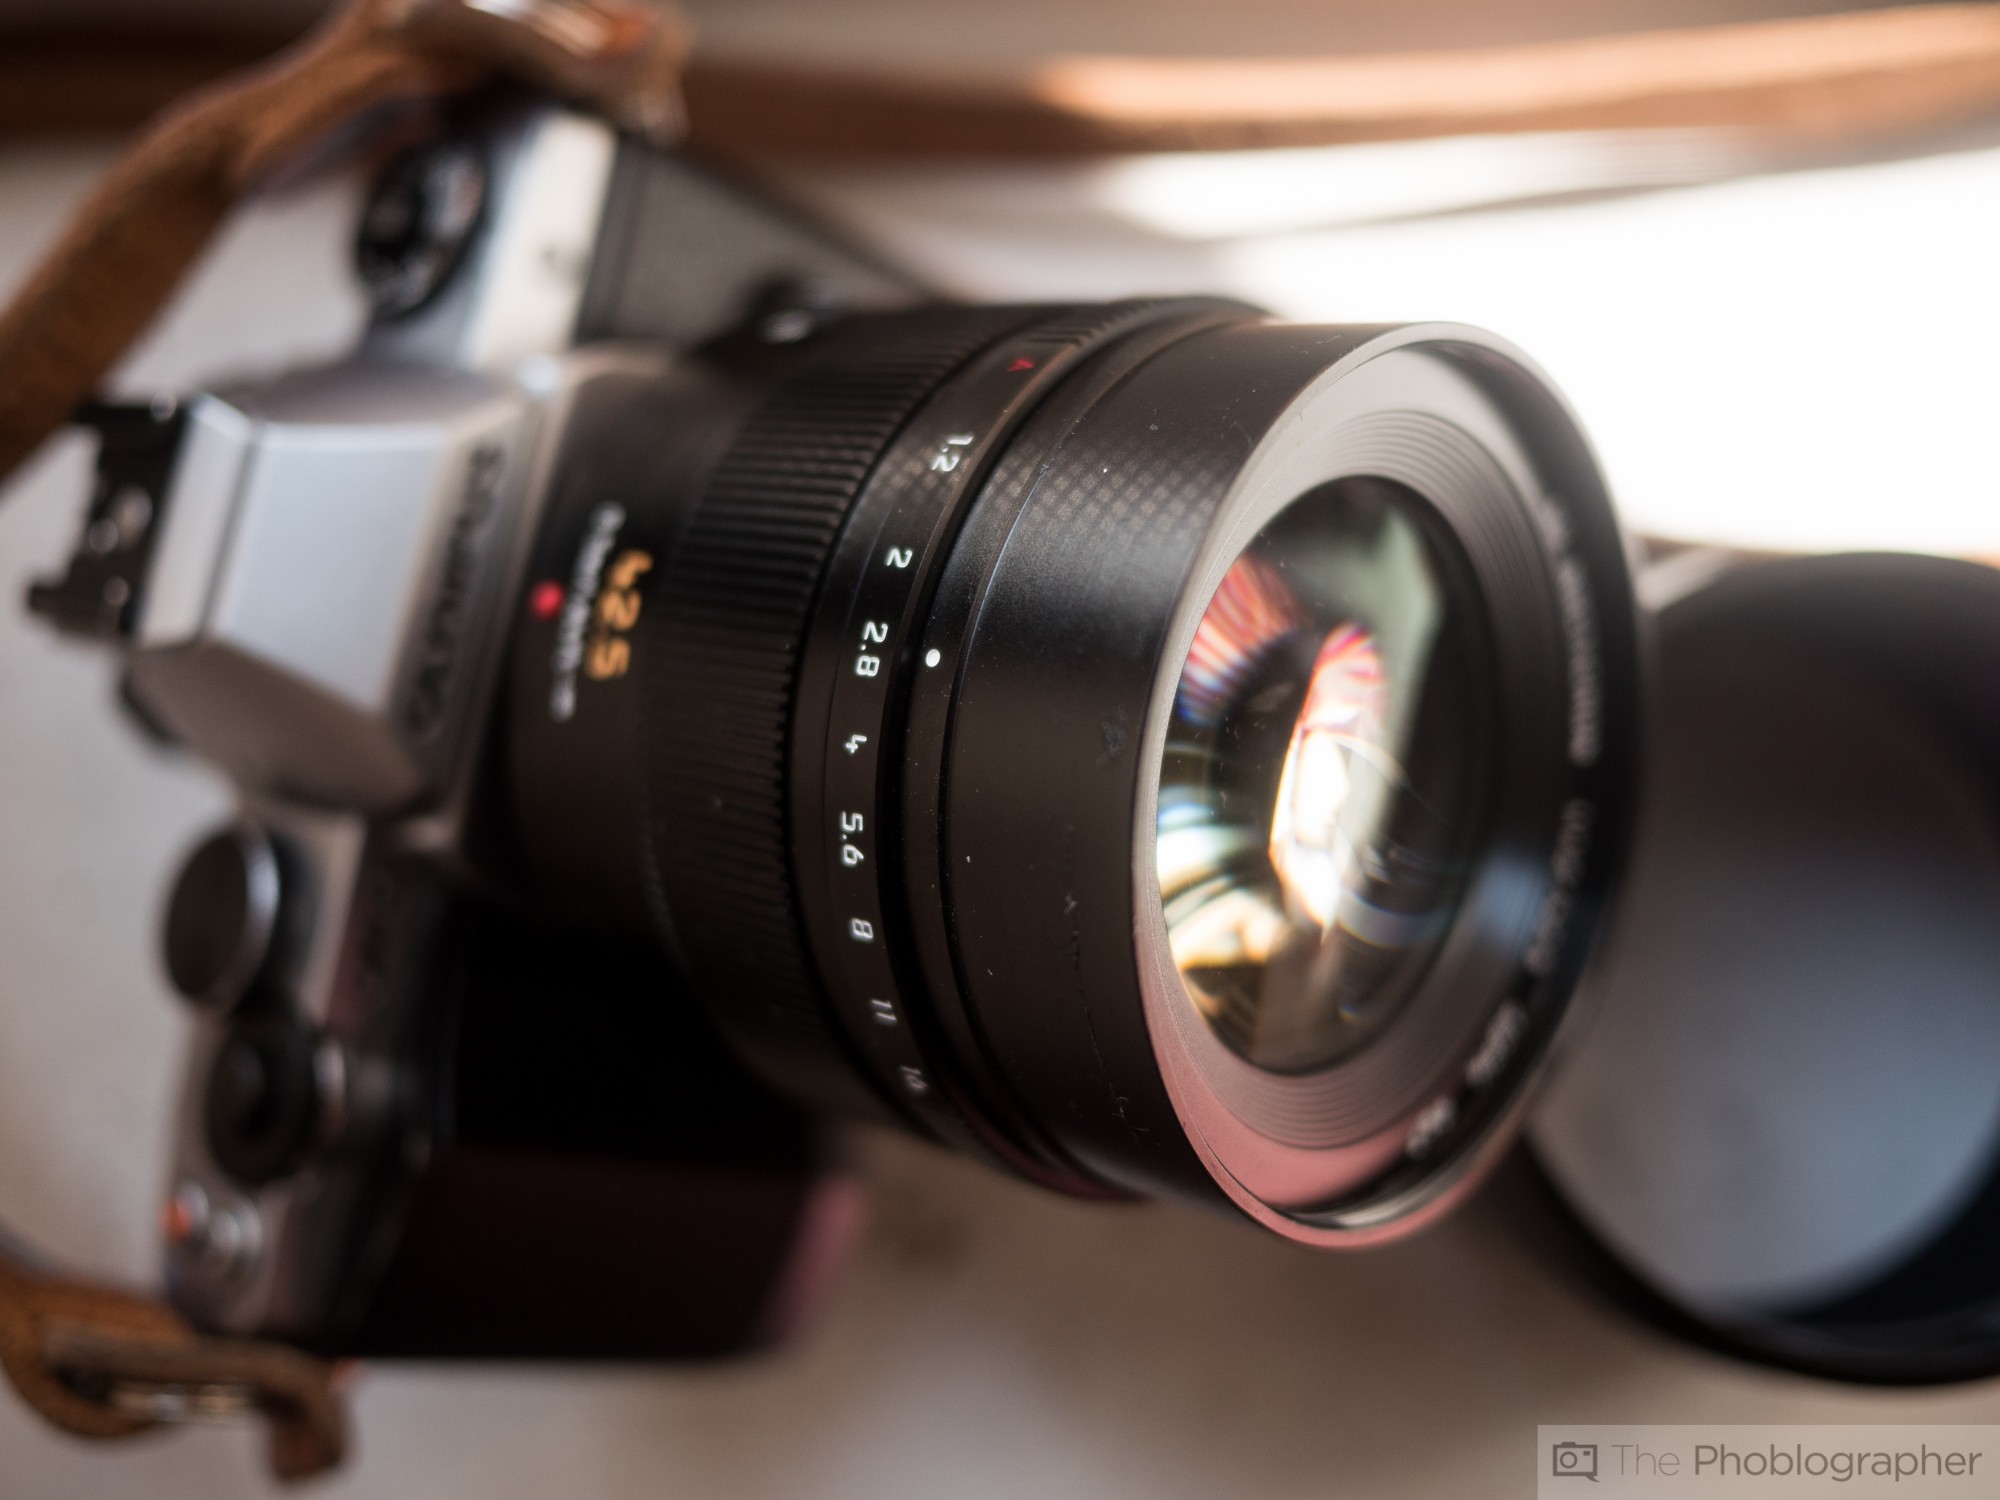 Chris-Gampat-The-Phoblographer-Panasonic-42.5mm-f1.2-review-product-images-4-of-7ISO-2001-400-sec-at-f-1.7.jpg